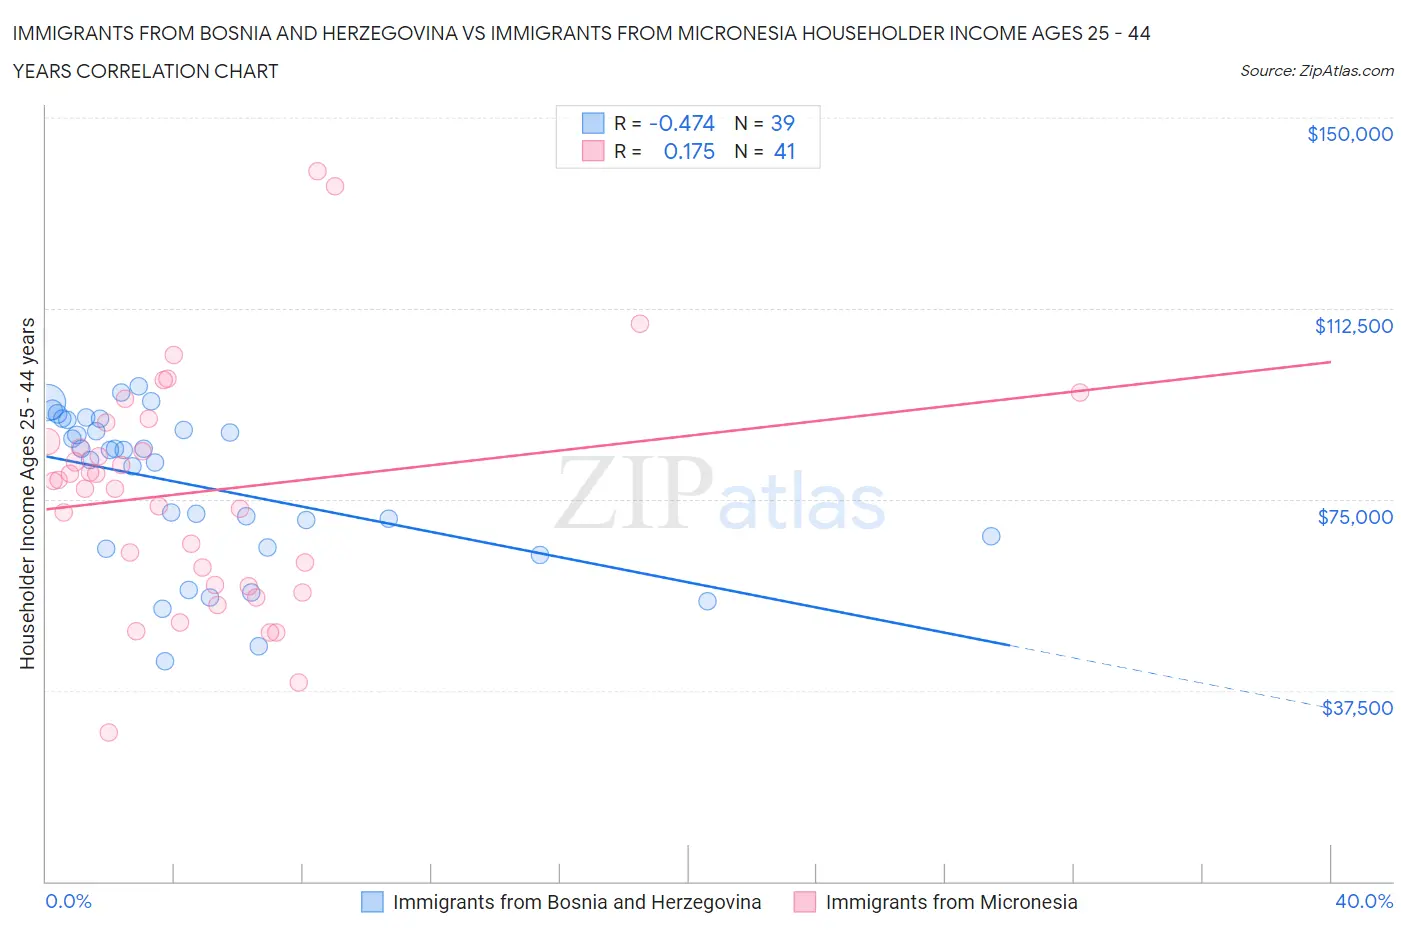 Immigrants from Bosnia and Herzegovina vs Immigrants from Micronesia Householder Income Ages 25 - 44 years